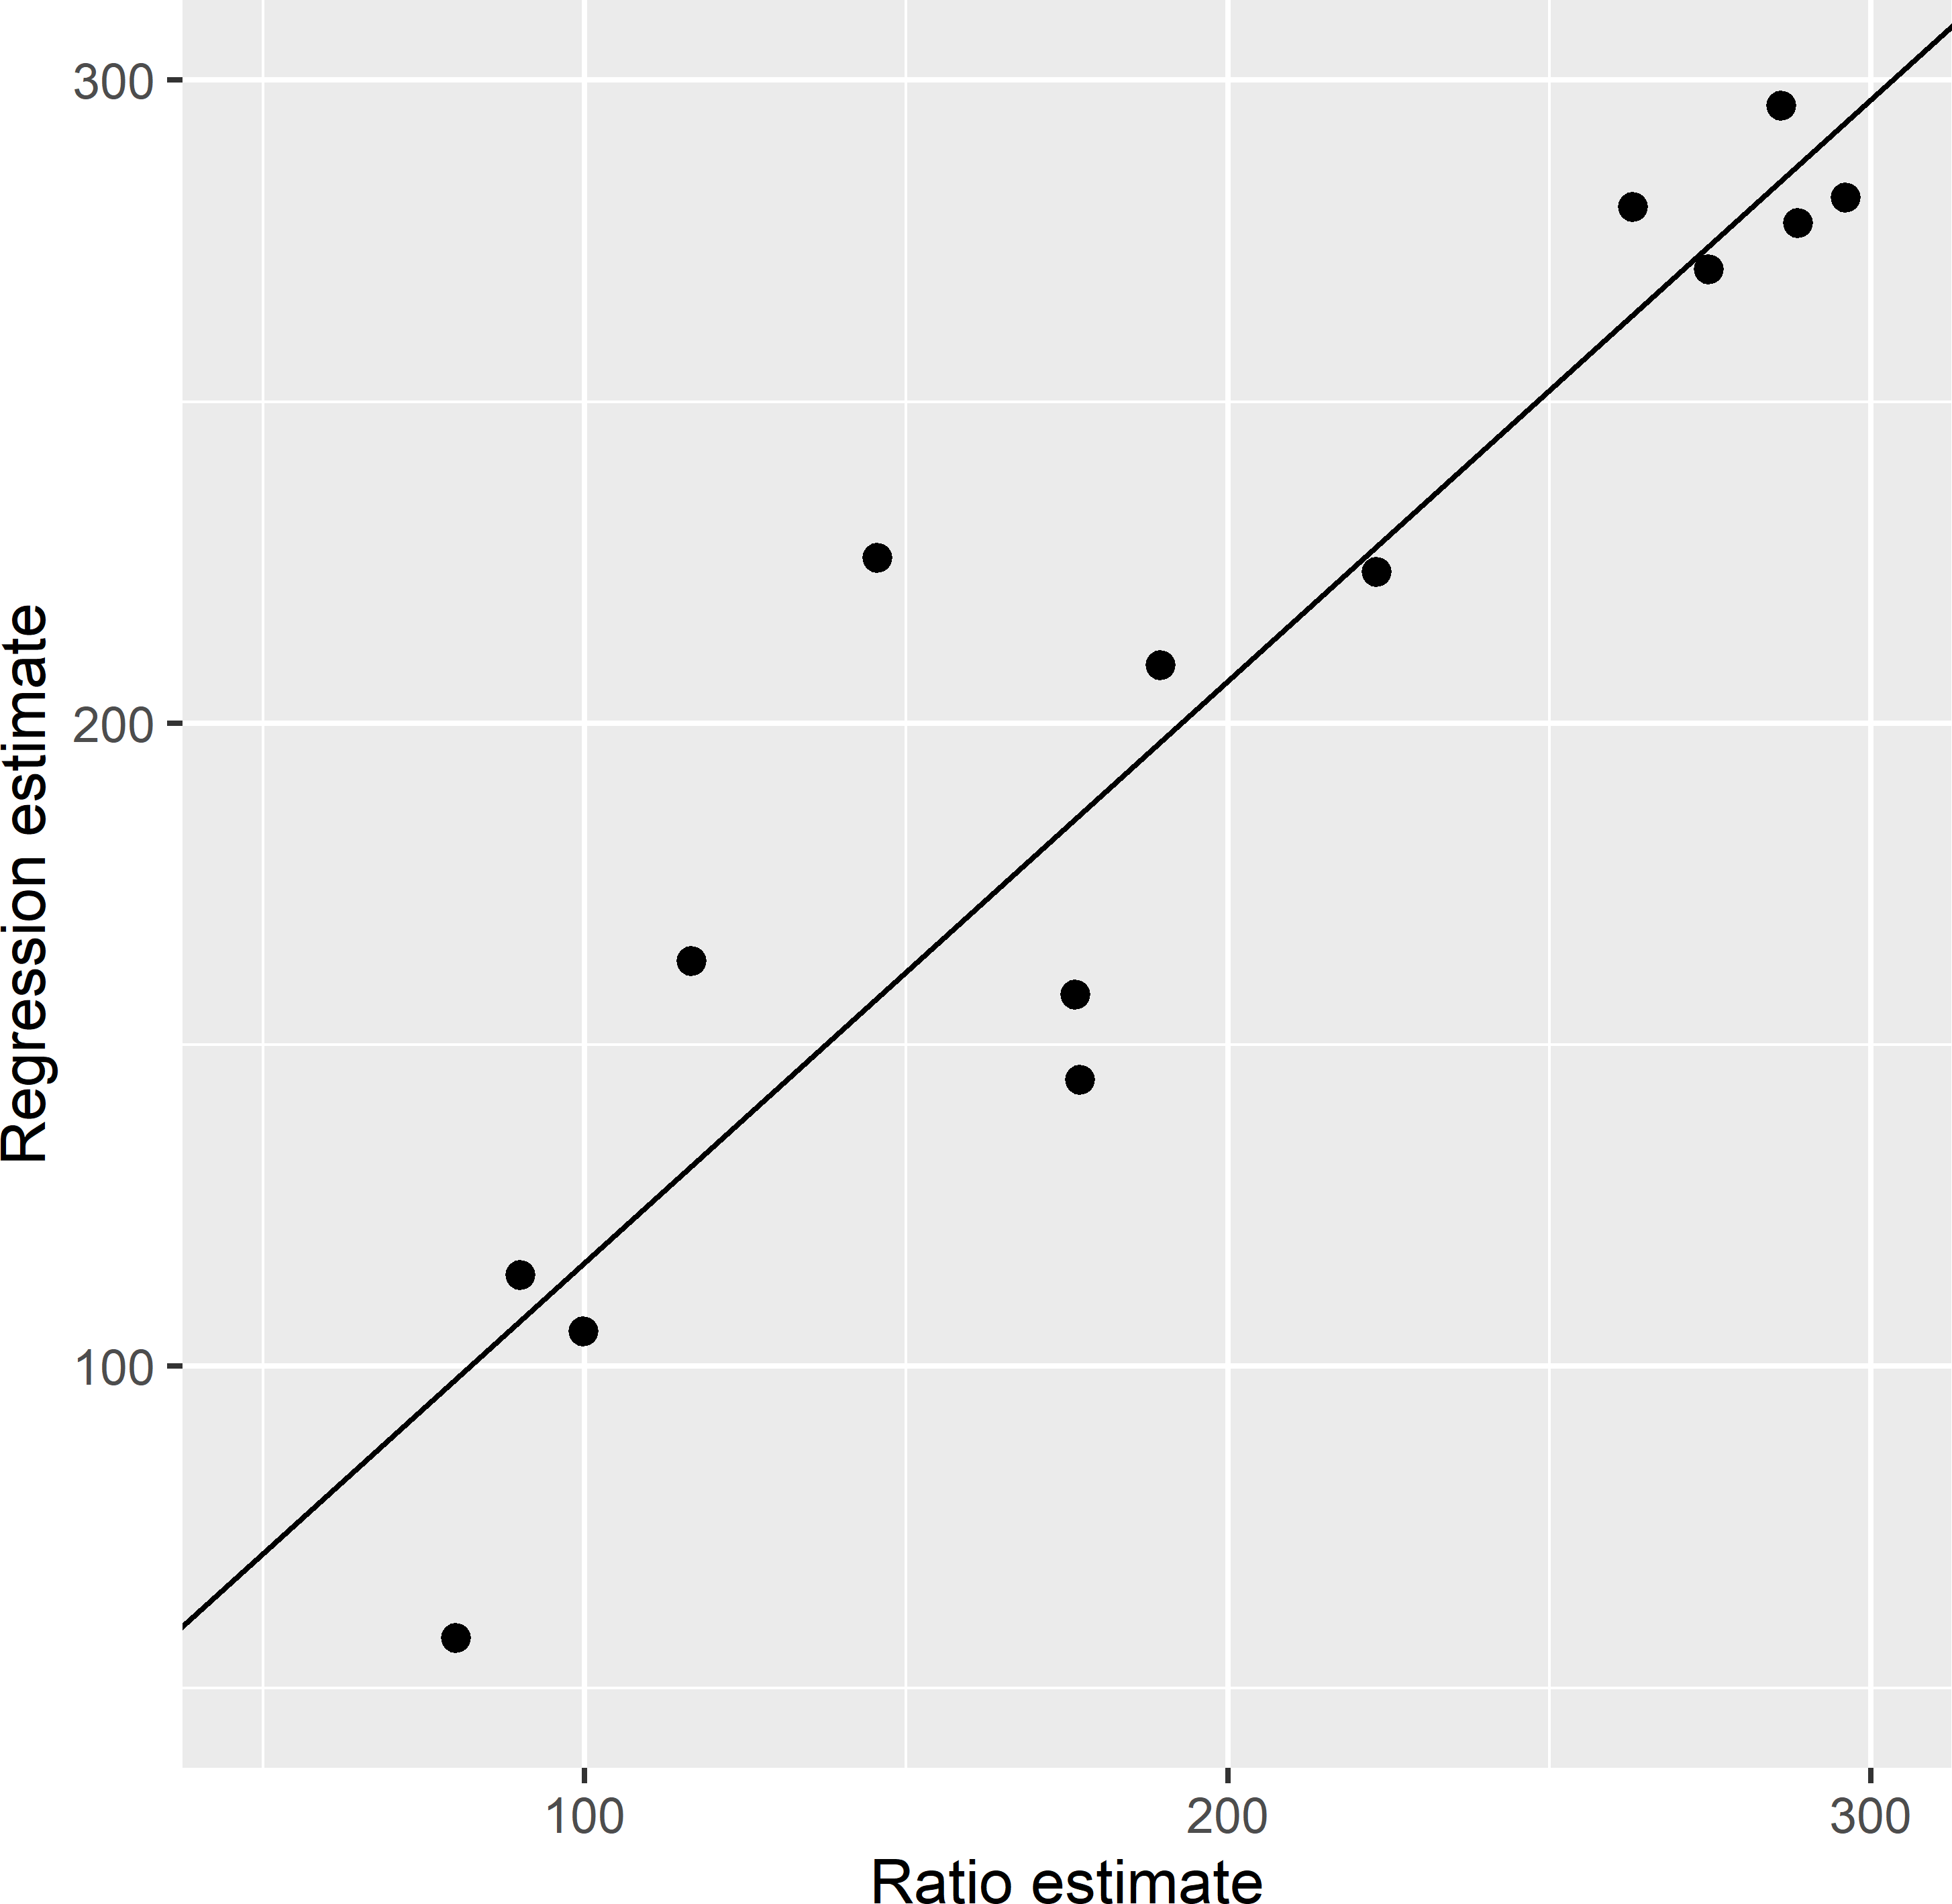 Scatter plot of the ratio and the regression estimates of the mean AGB (109 kg ha-1) of ecoregions in Eastern Amazonia for simple random sample without replacement of size 200. In the regression estimate, lnSWIR2 is used as a predictor. The line is fitted by ordinary least squares.